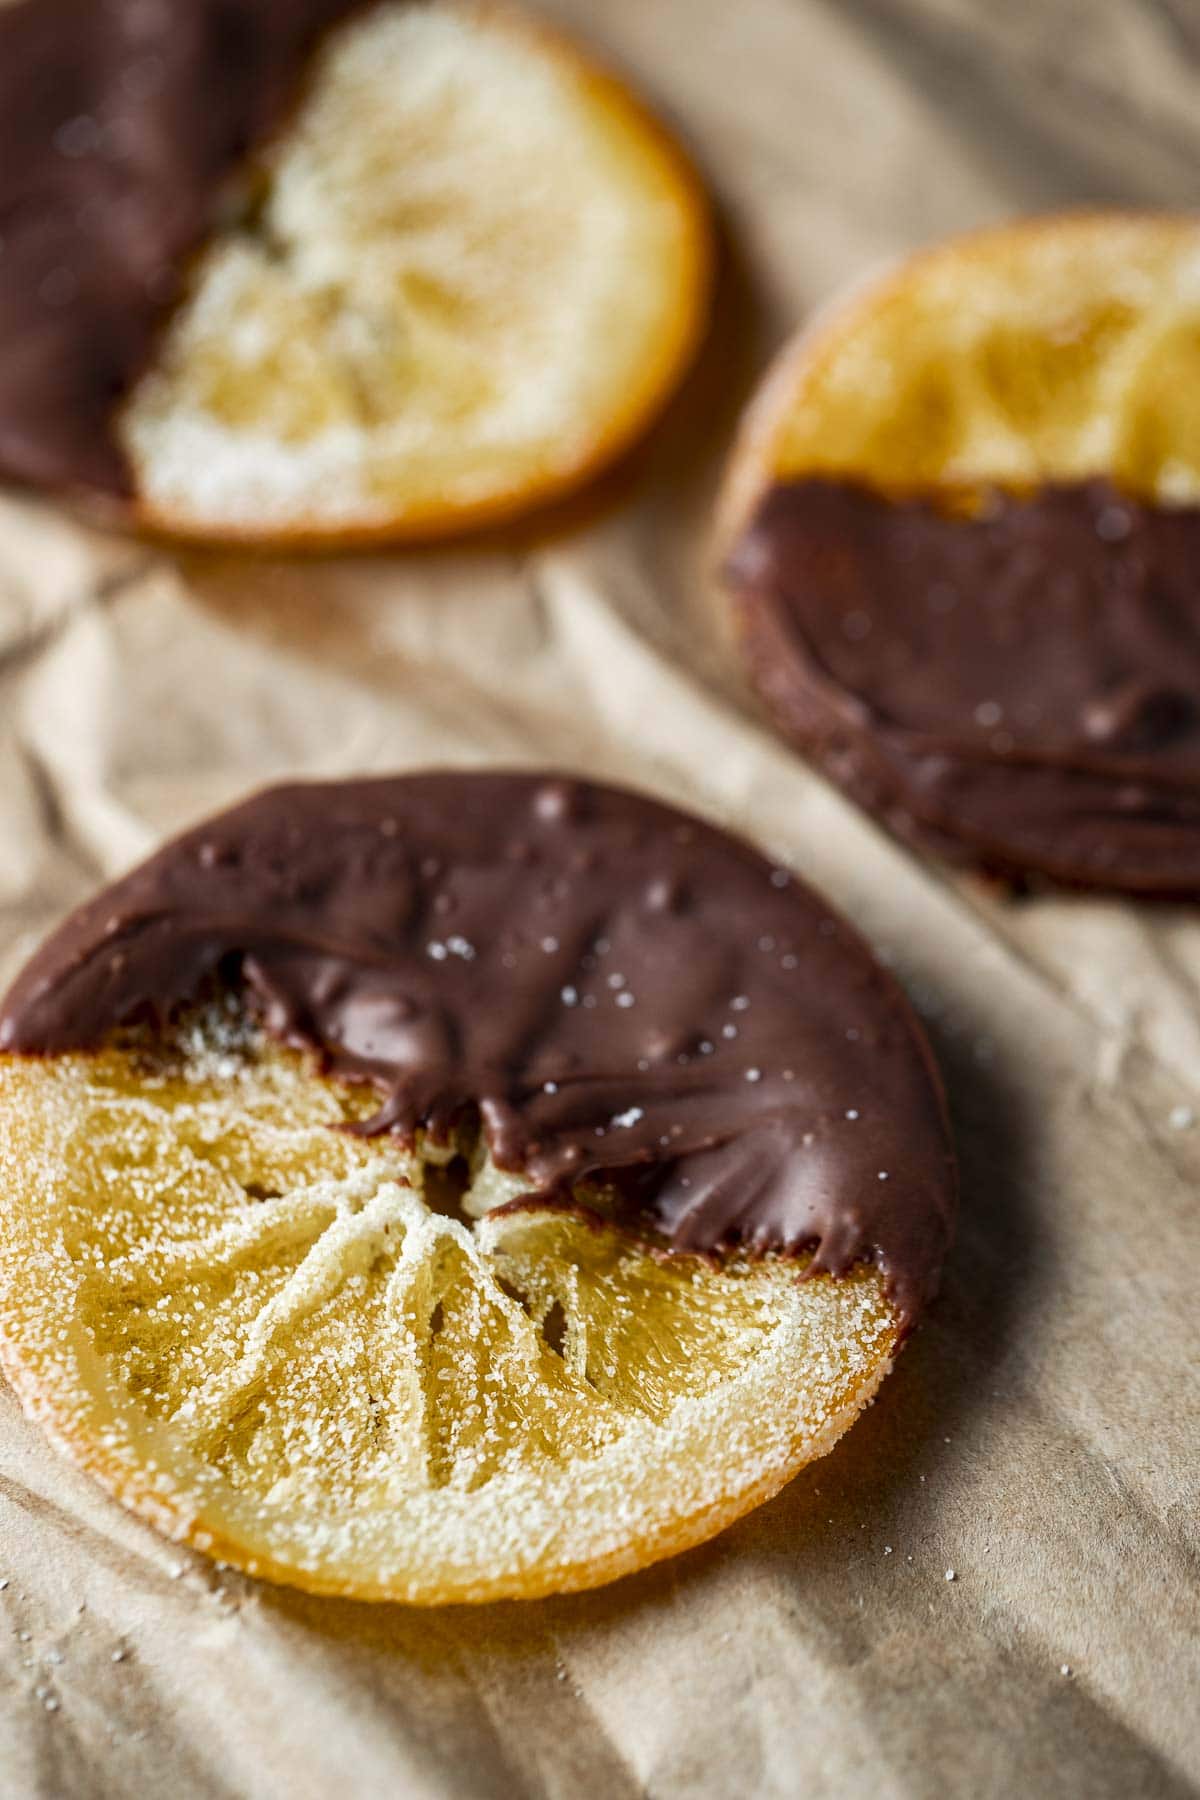 Side view of a candied orange slice half coated in chocolate.